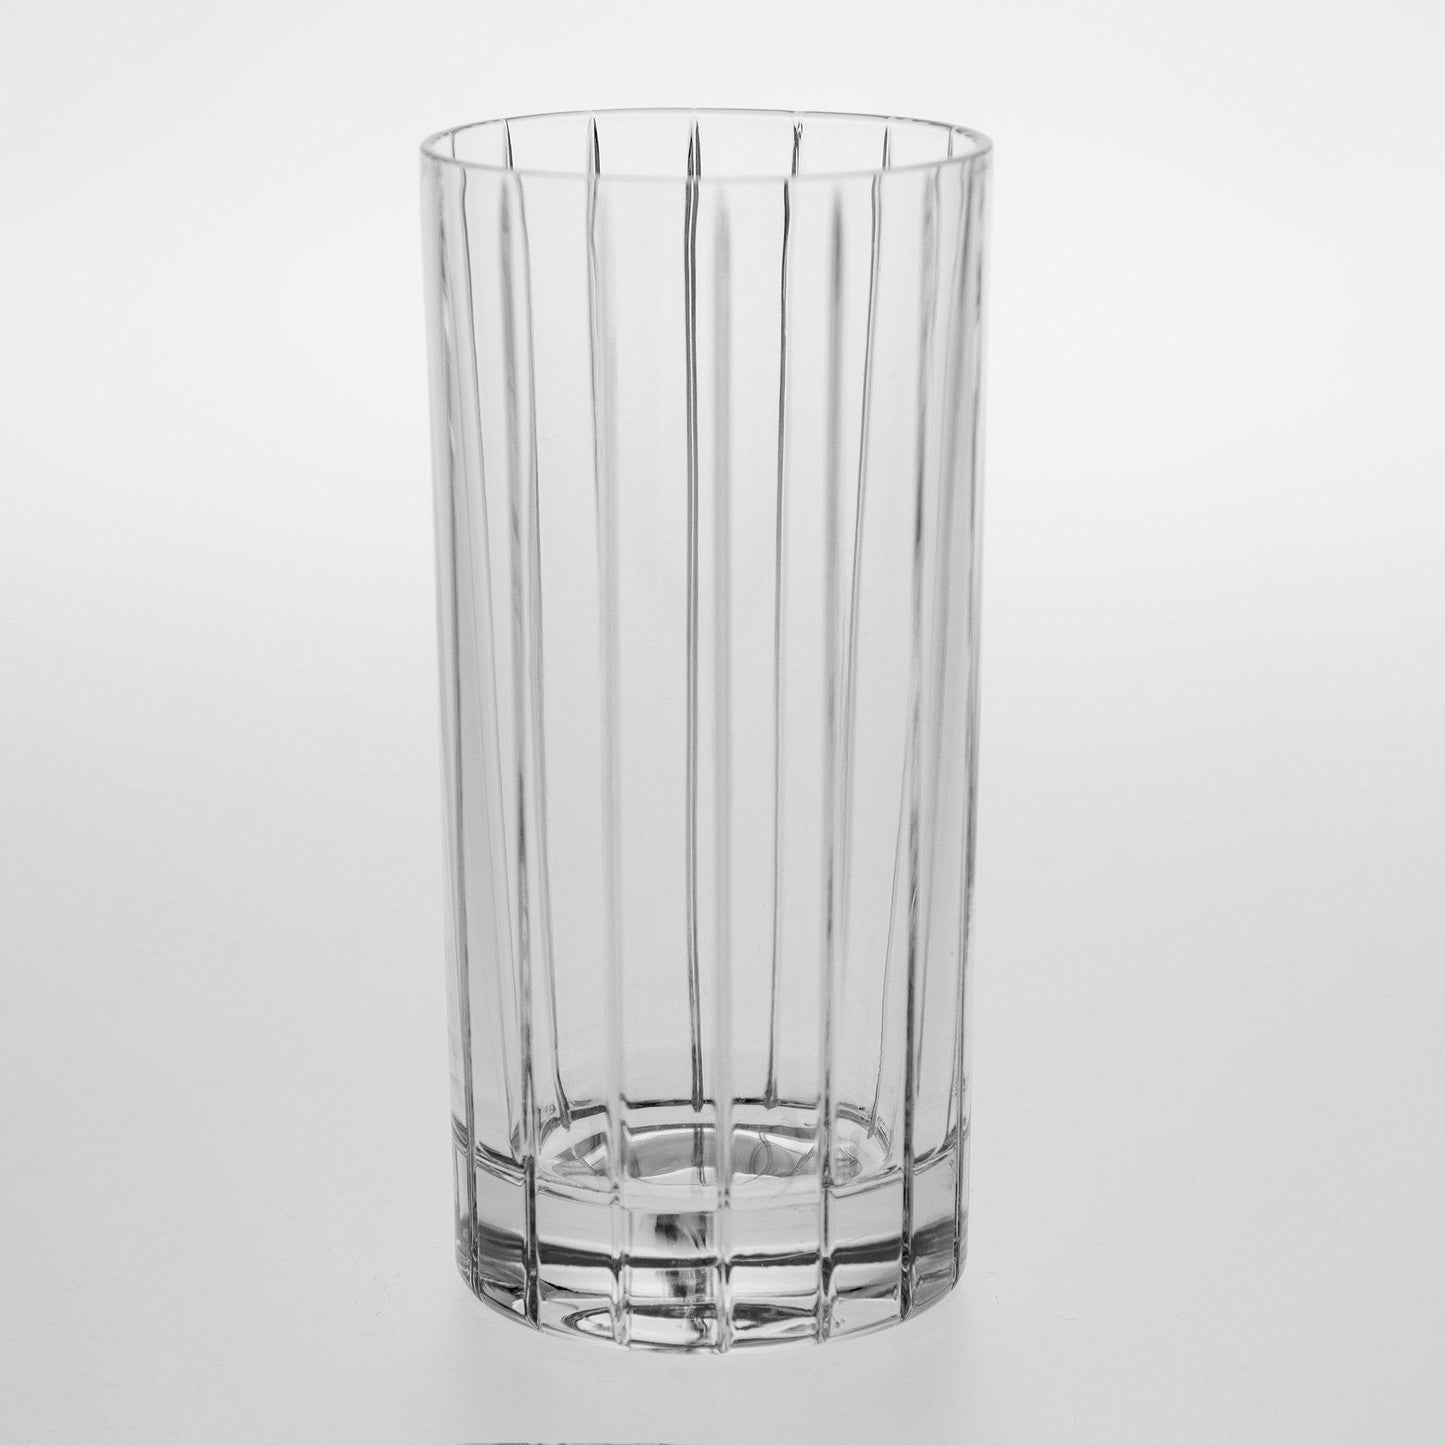 Tall crystal glass with linear design